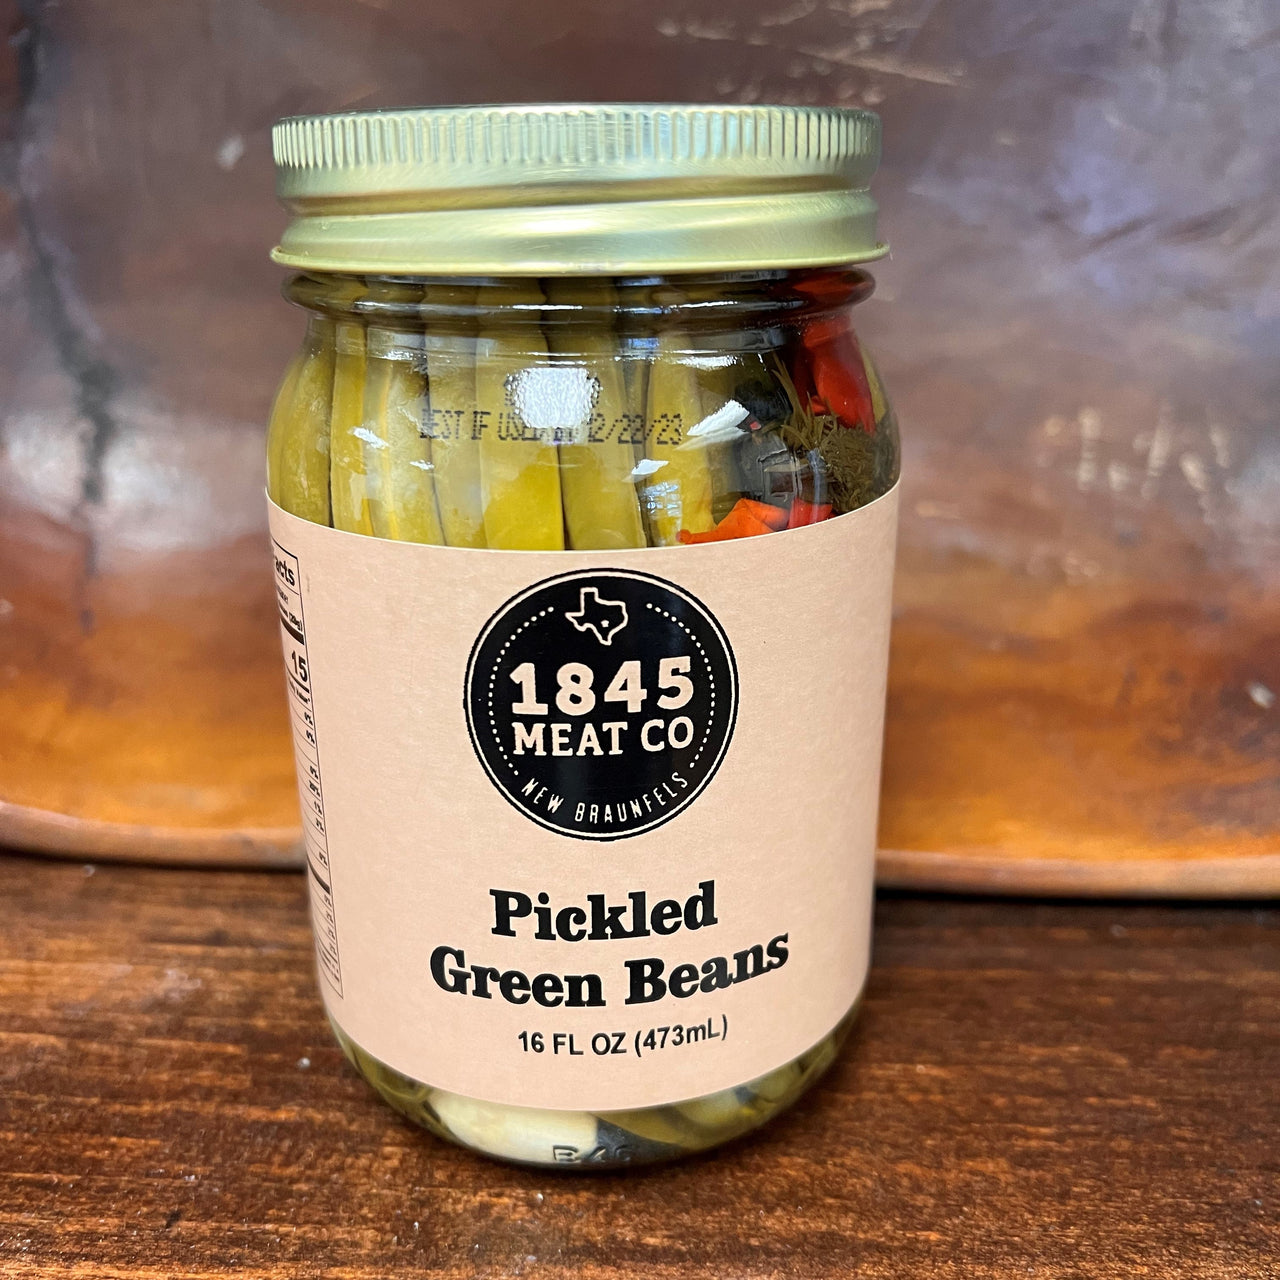 ﻿A perfect complement to your favorite Bloody Mary or as an addition to your next charcuterie board.